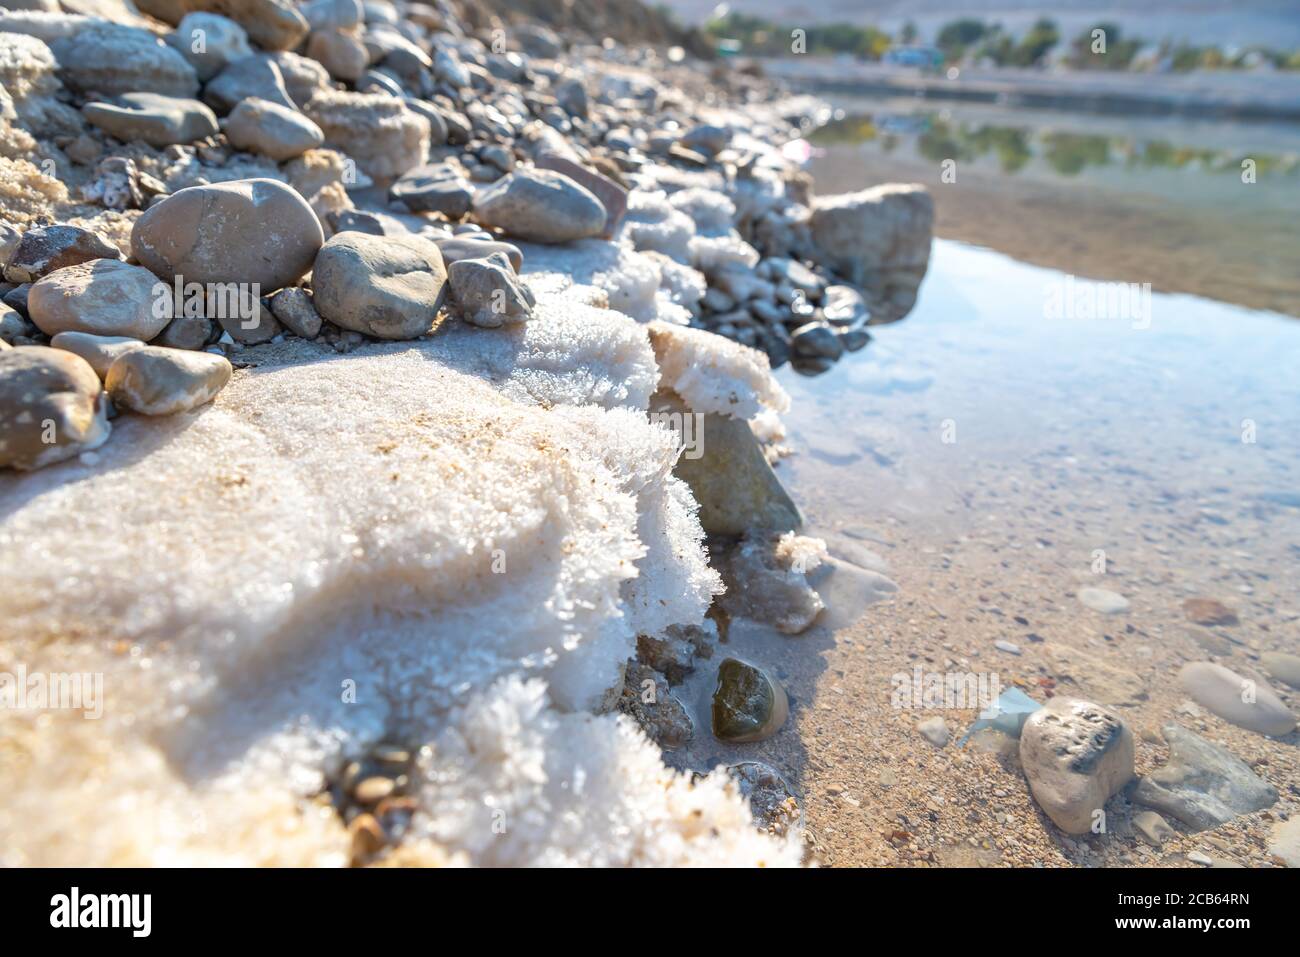 Israel, Dead Sea, salt crystalization caused by water evaporation Stock Photo